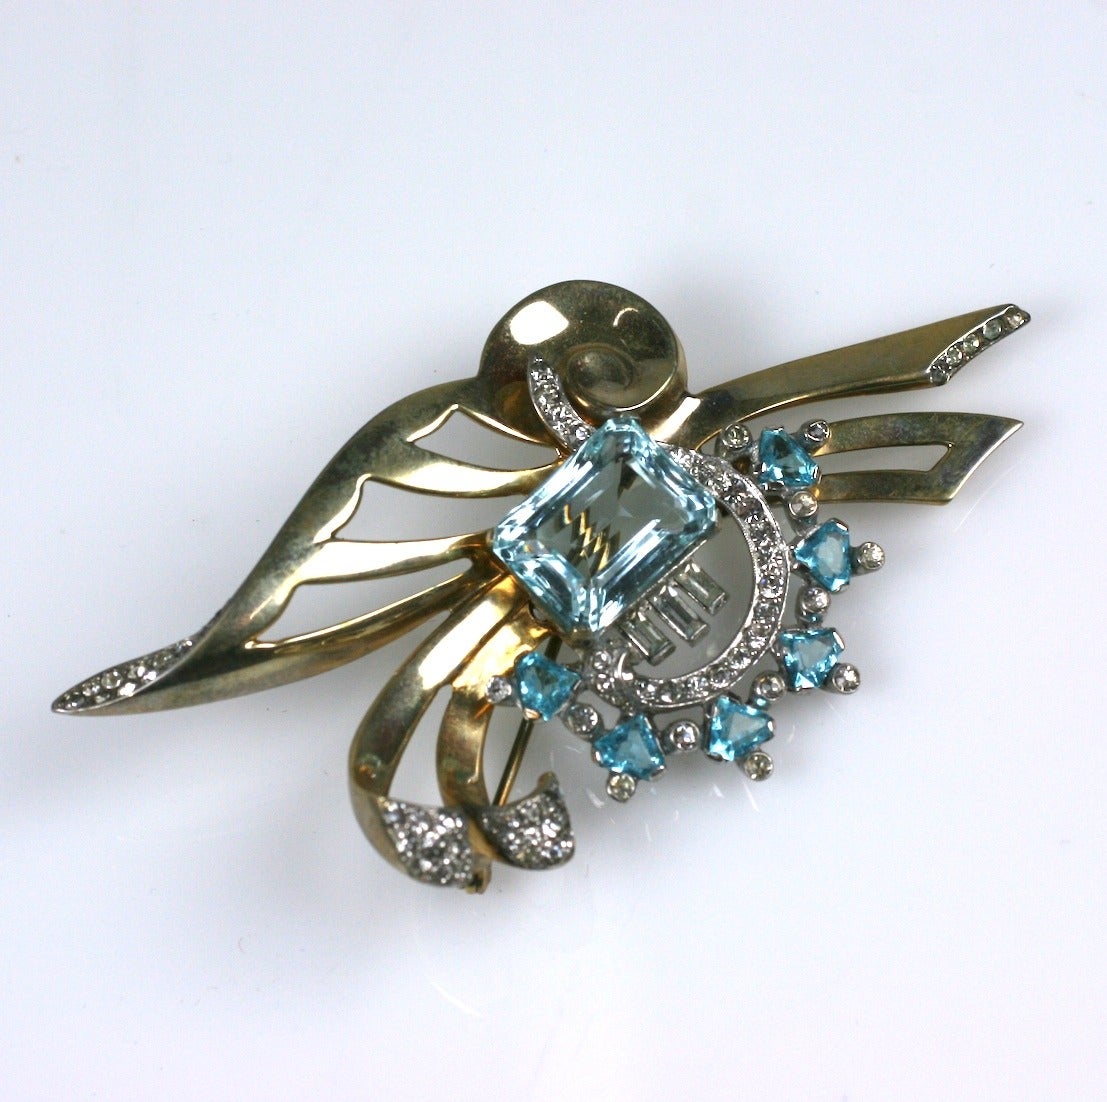 Mazer brothers, gold washed sterling silver Retro style brooch. An abstract butterfly in brooch form, set with crystal paste rounds and baquettes,and fancy cut faux aquamarines. 1940's USA. 
Excellent condition. L 3.25